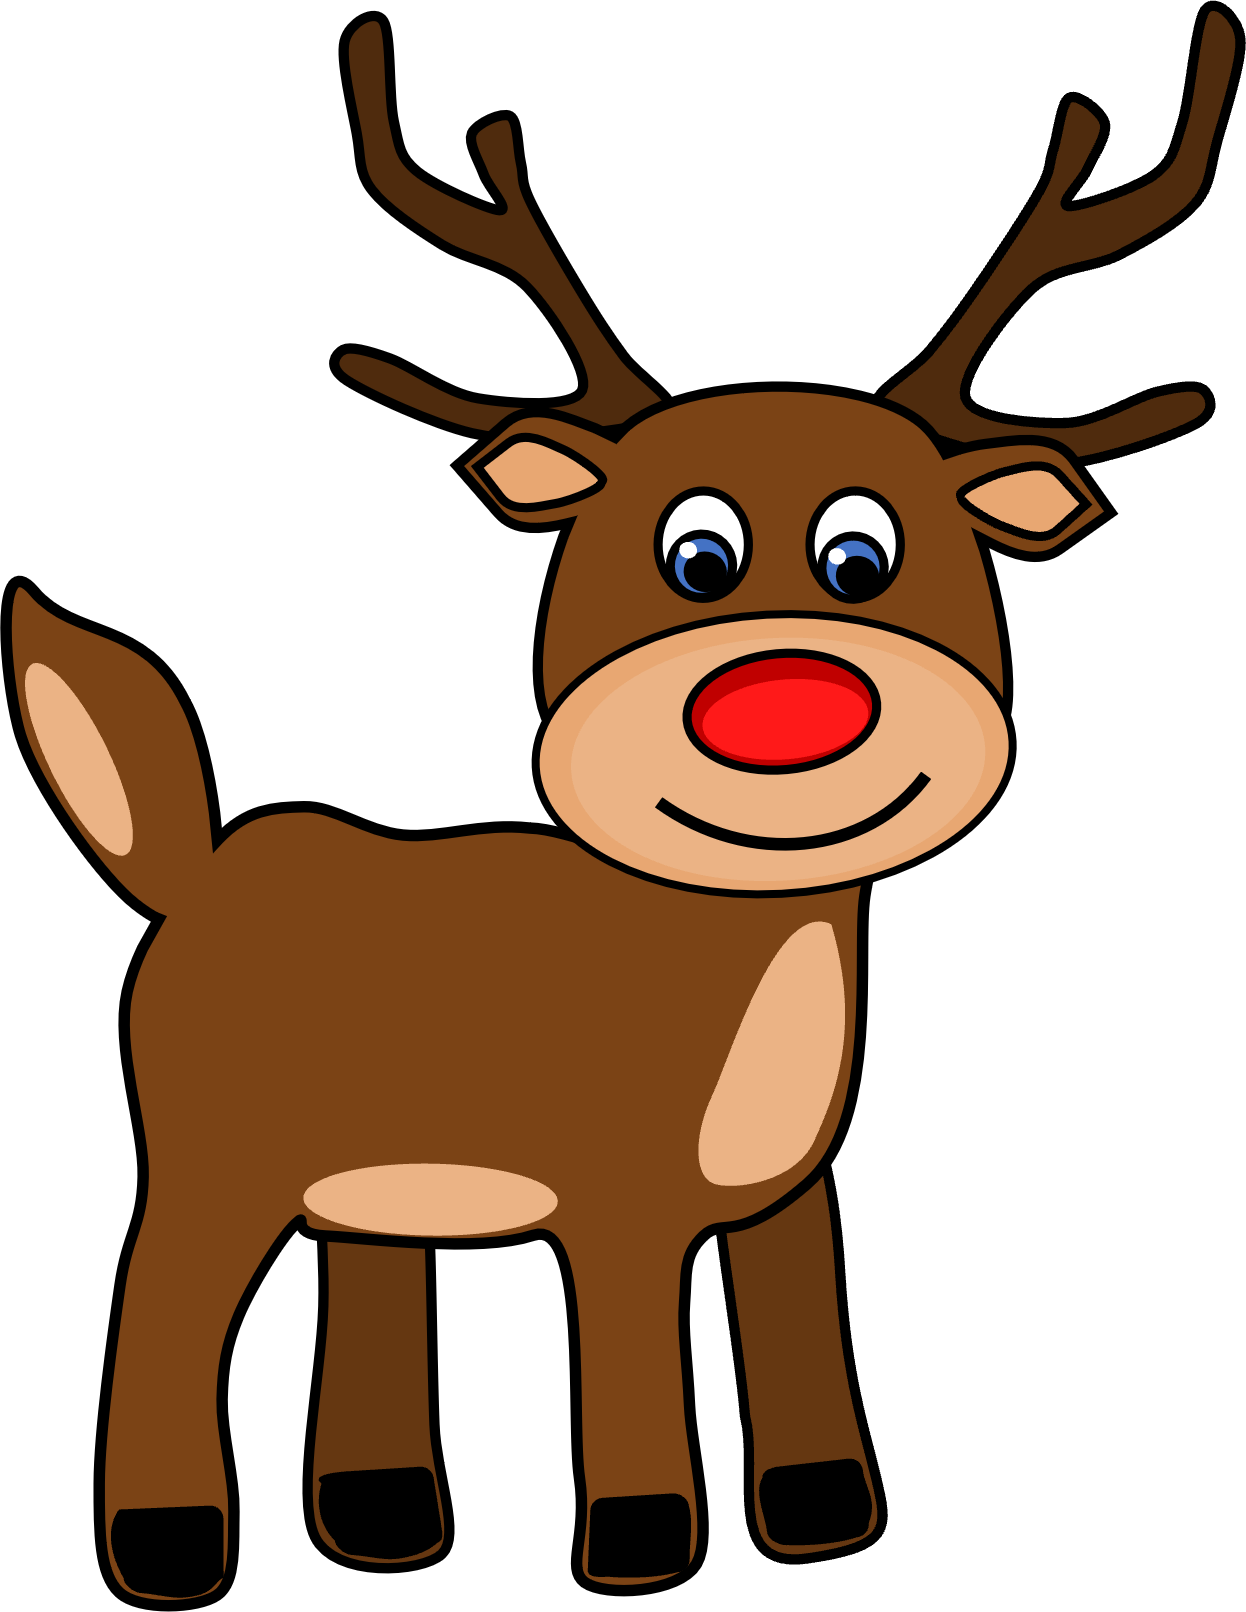 Clip Art - Reindeer - FREE's featured image